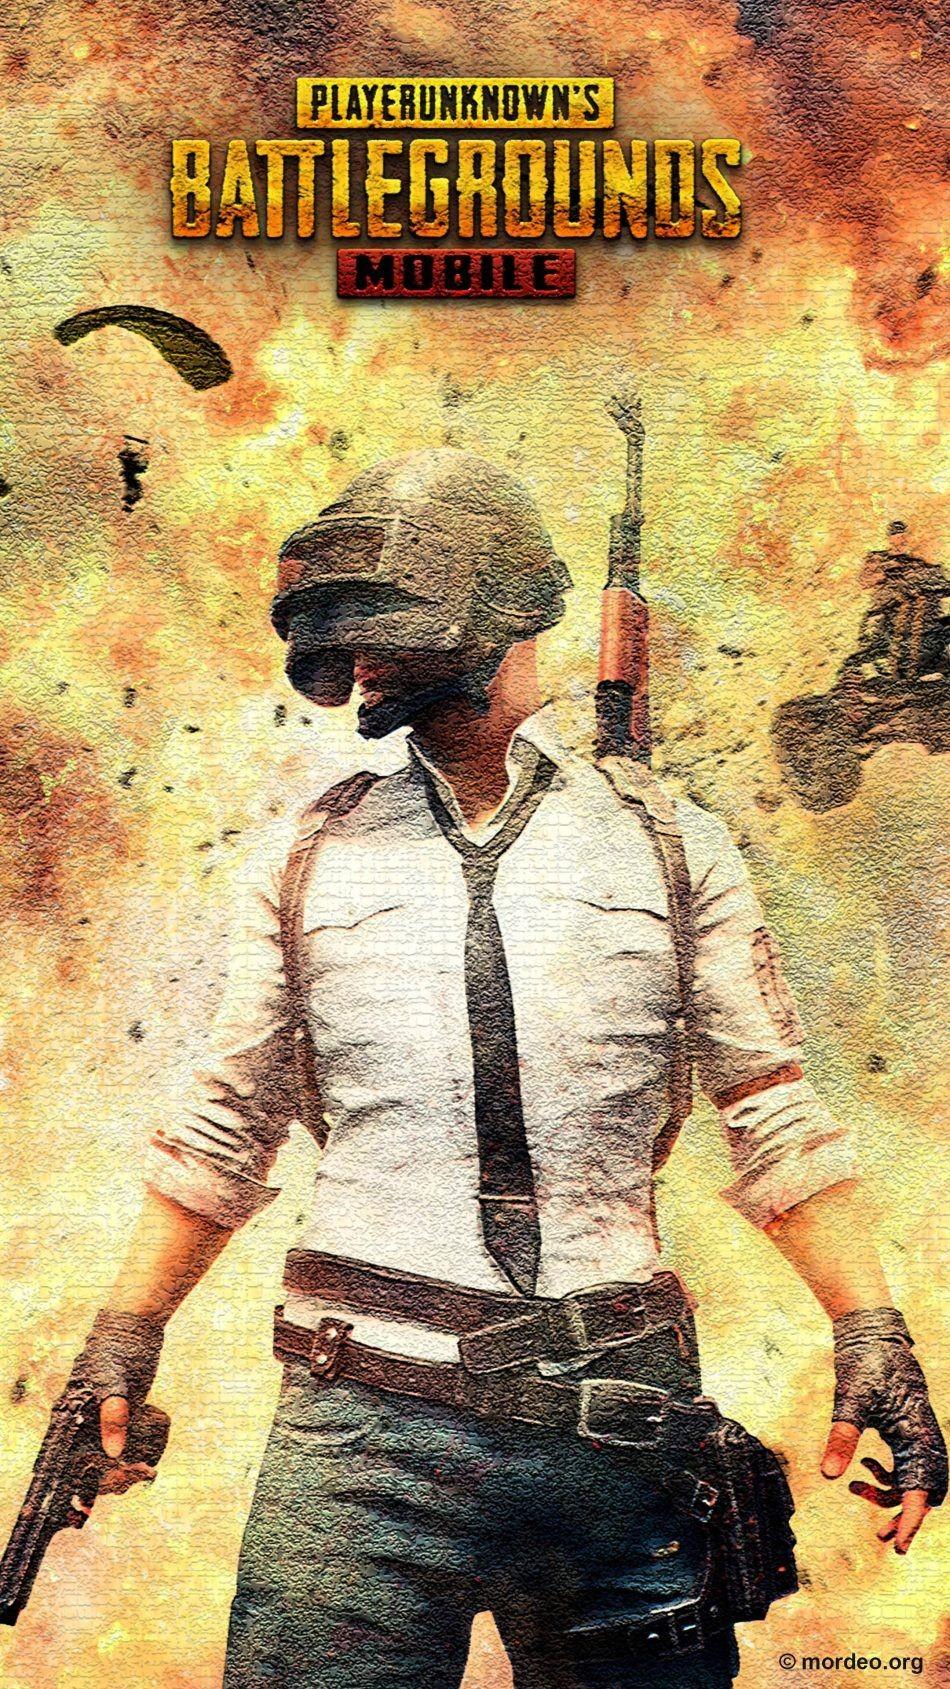 PUBG HD Wallpaper For Pc, Android & iPhone Mobile Image